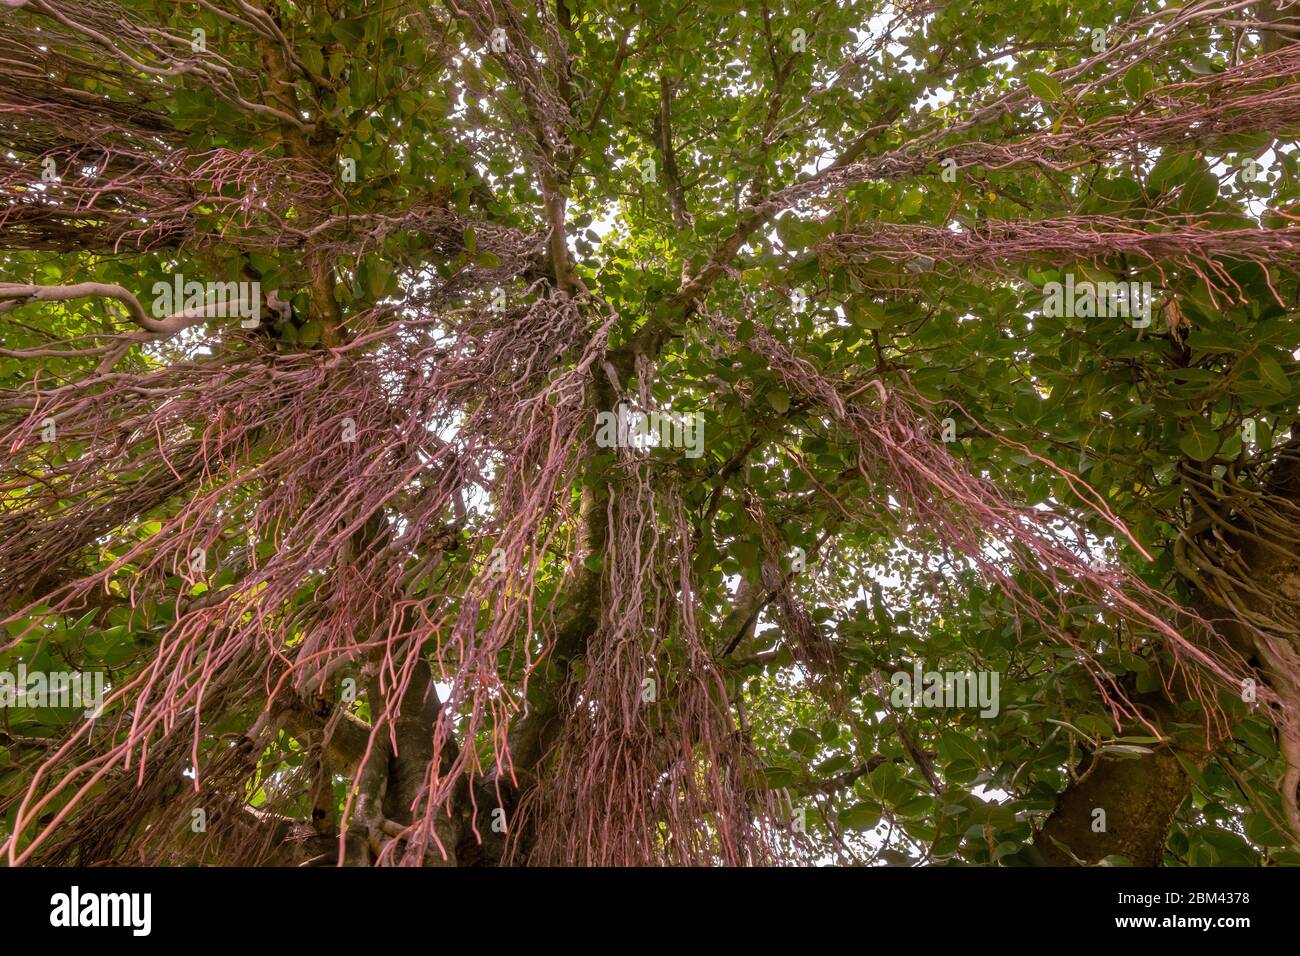 Banyan tree view from botton to sky,  with multiple trunks, and large number of branches. Stock Photo